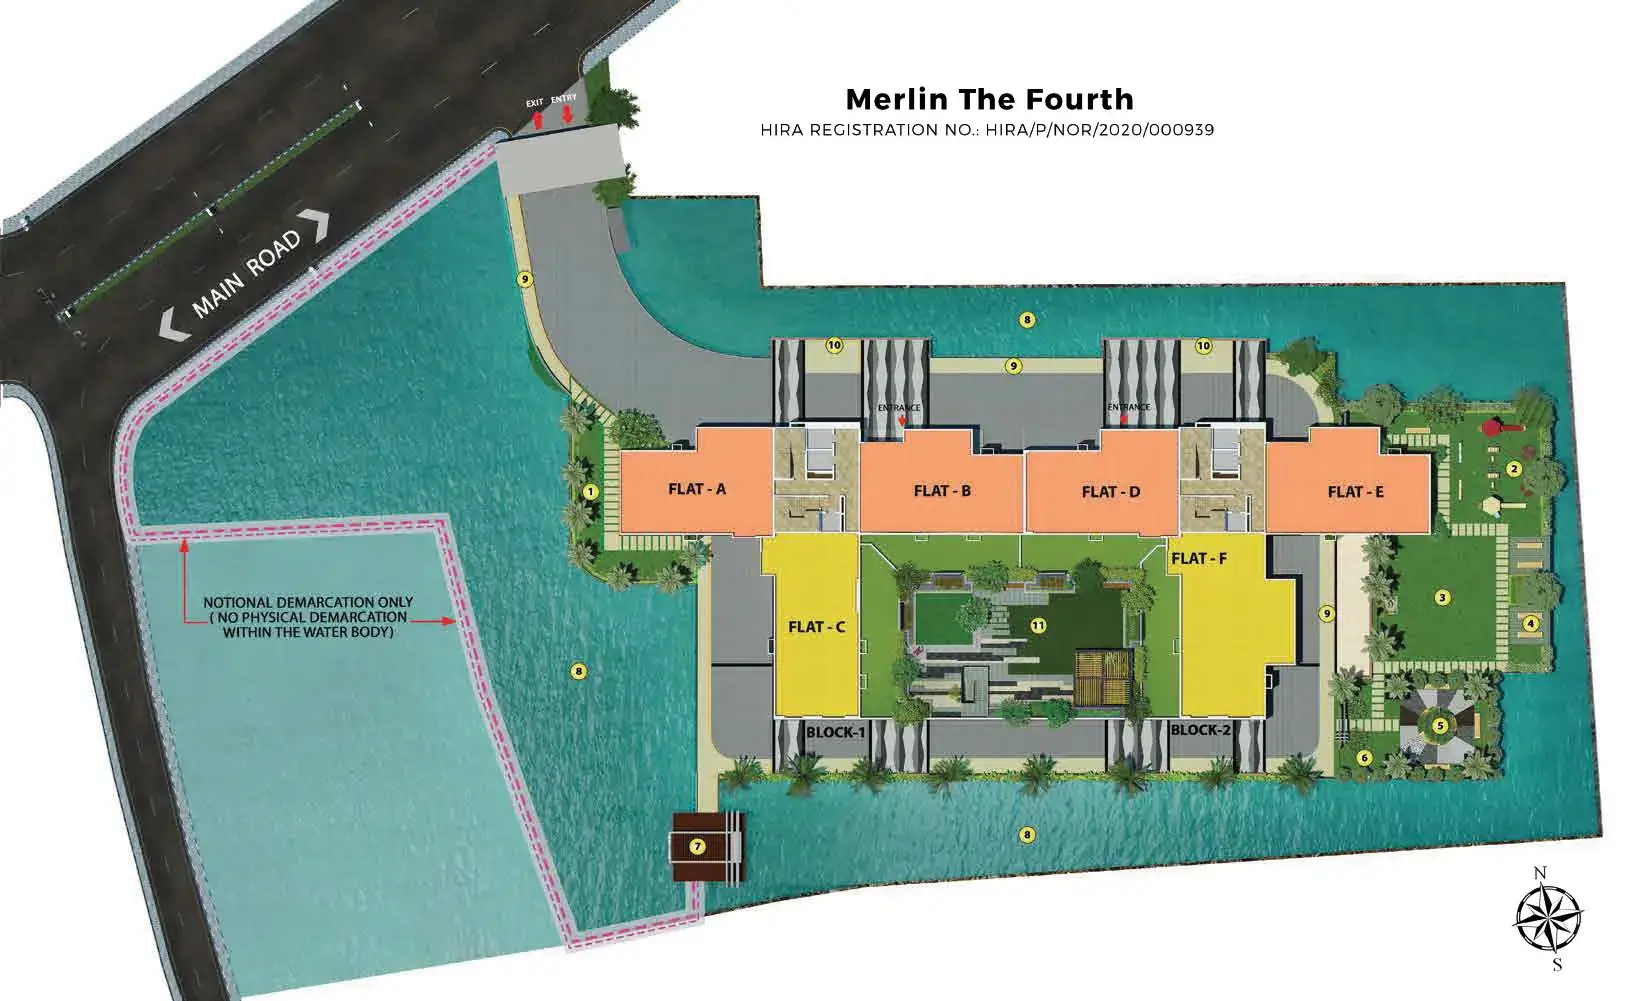 Merlin The Fourth Master Layout Plan